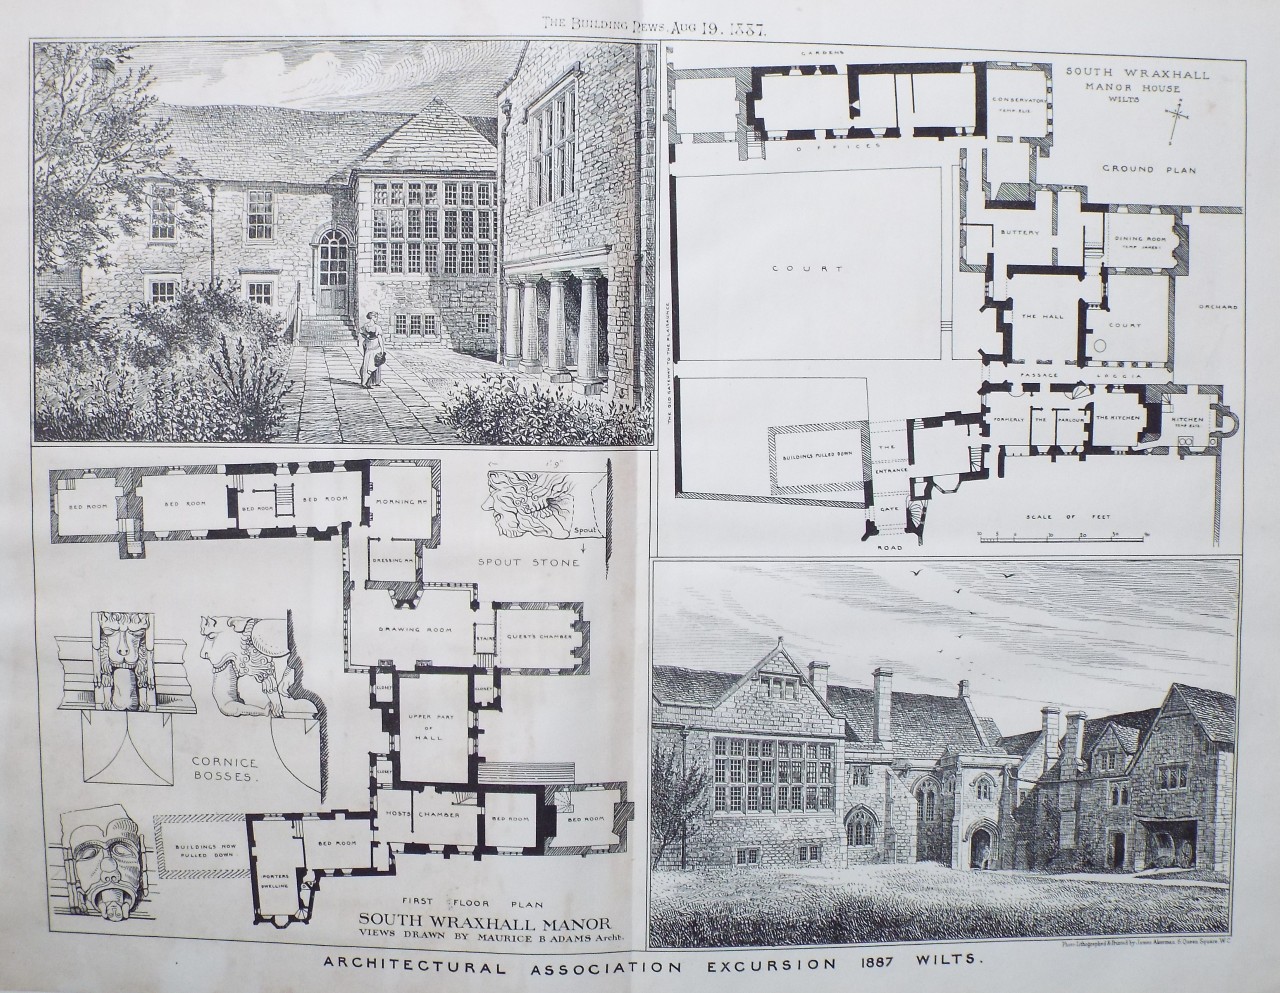 Photo-lithograph - South Wraxhall Manor. Architectural Association Excursion 1887 Wilts.